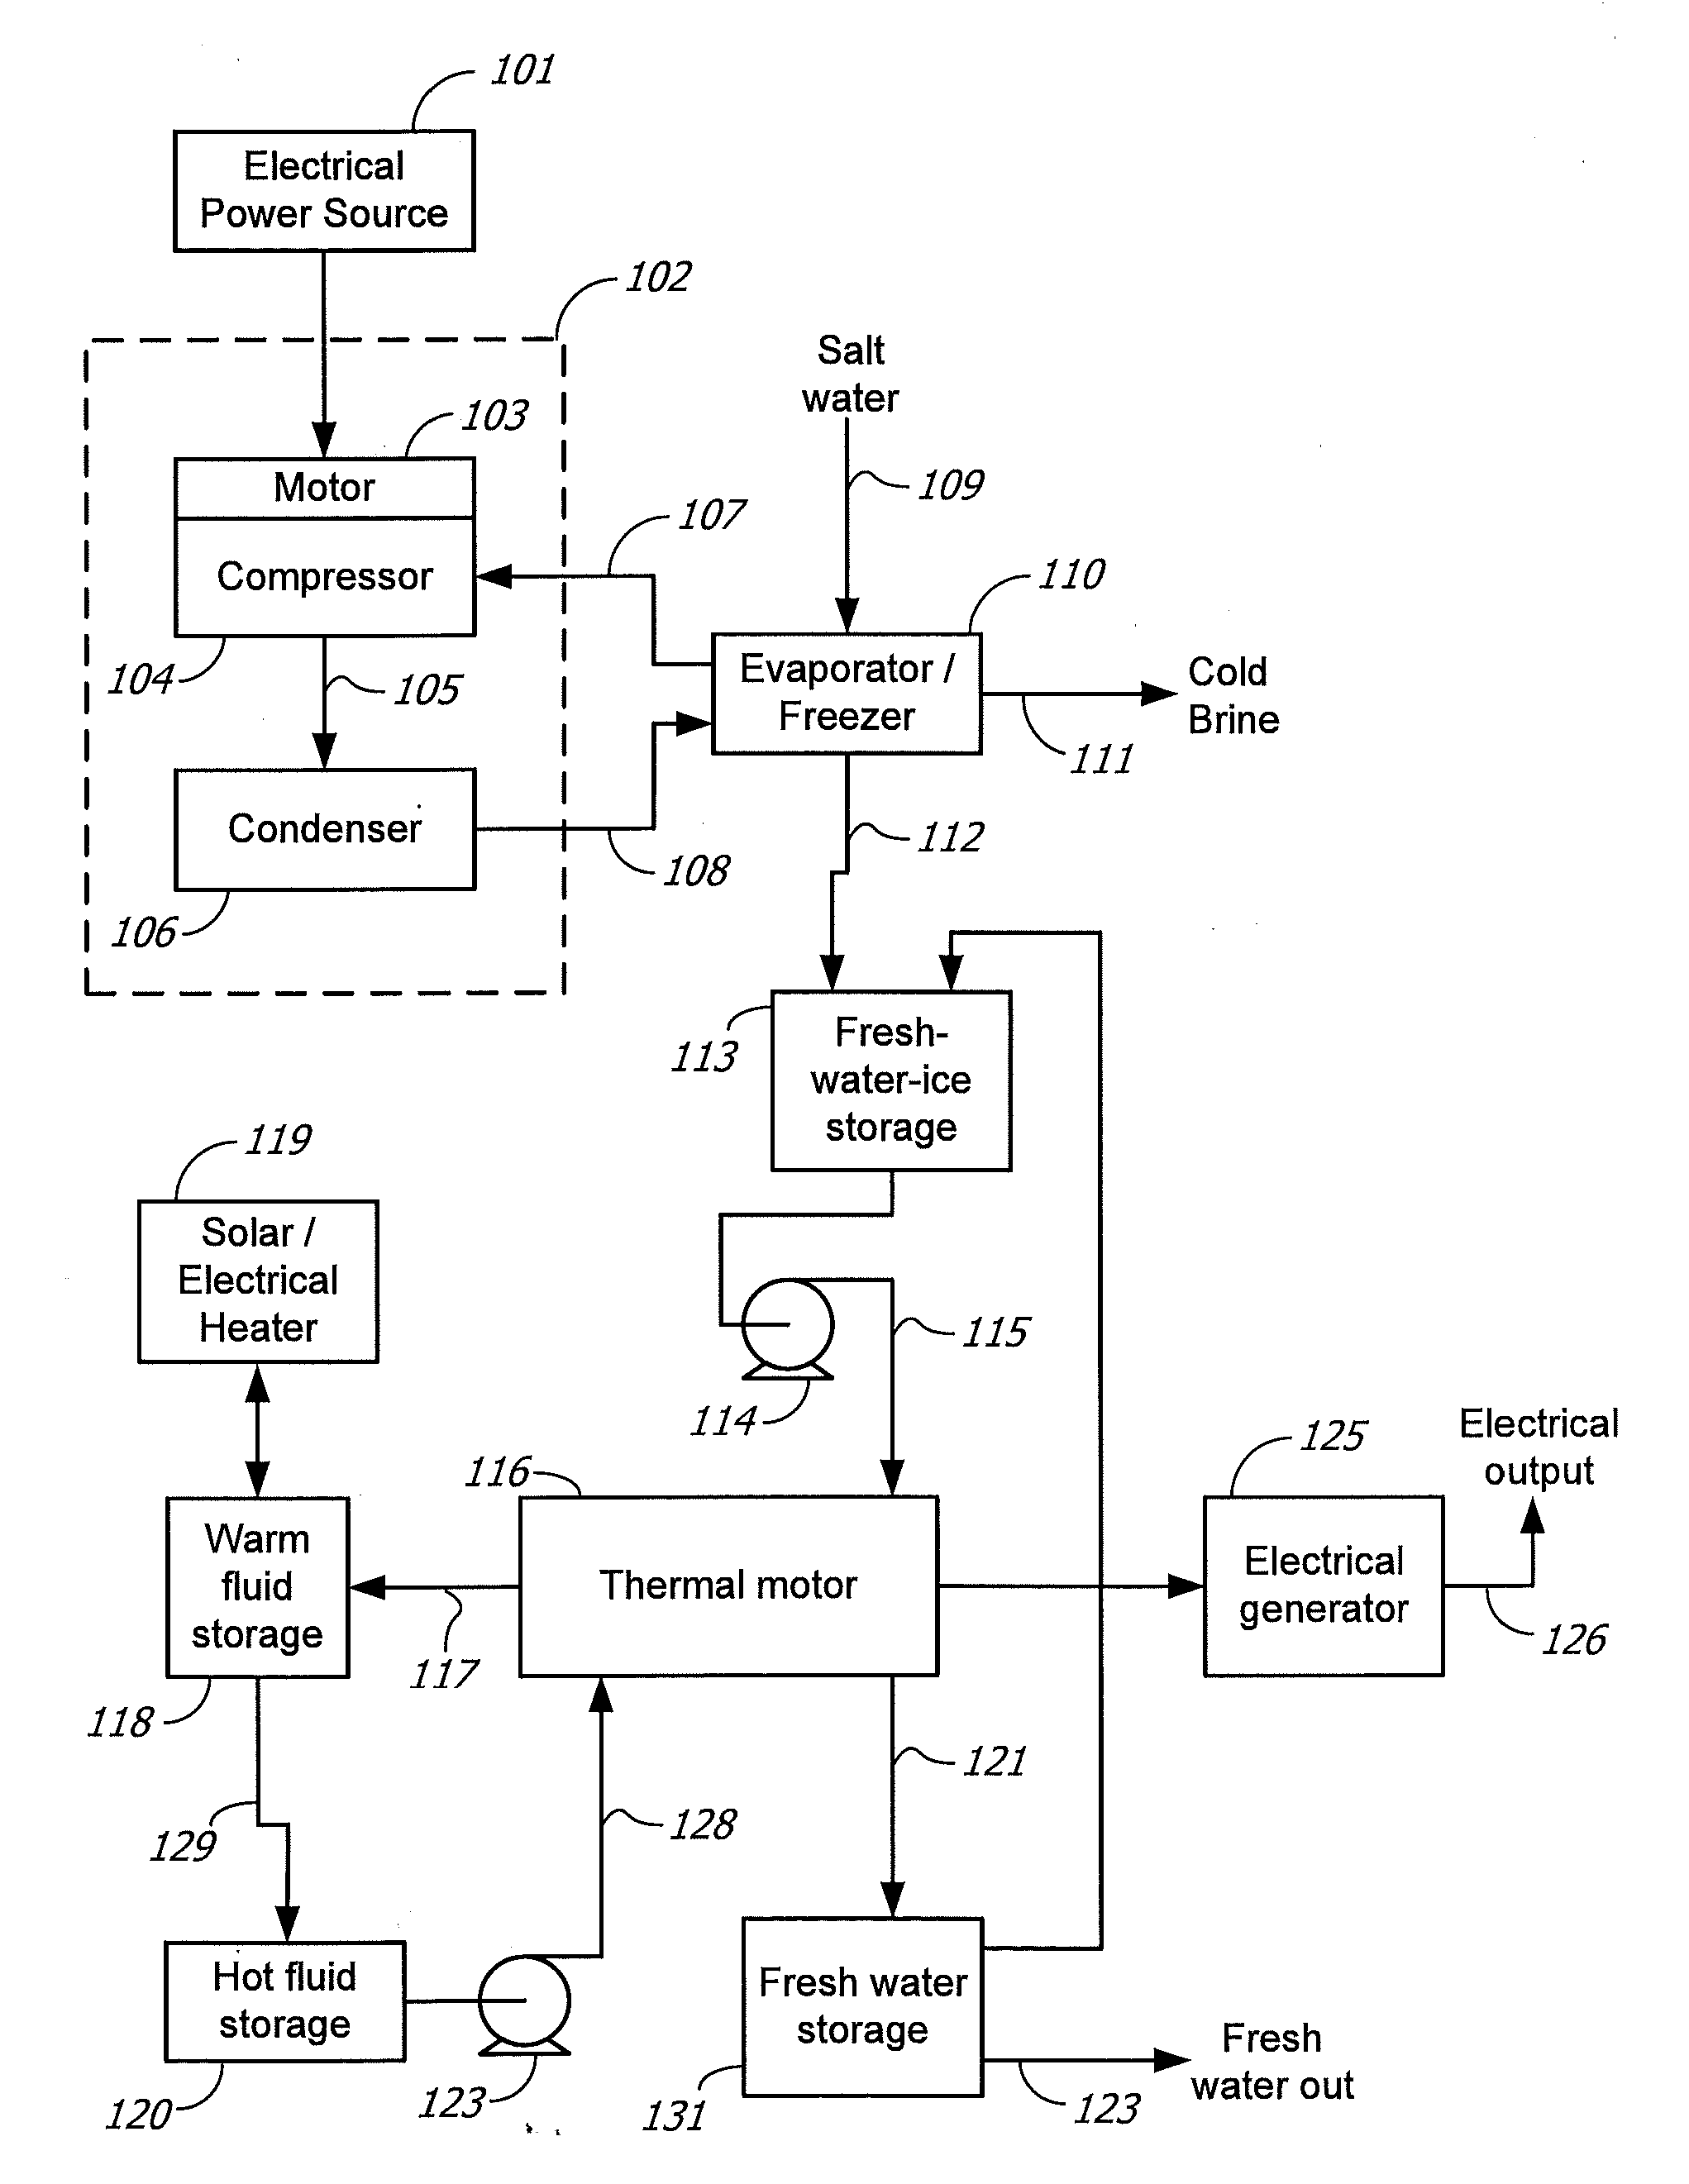 Systems and Methods for Providing Multi-Purpose Renewable Energy Storage and Release